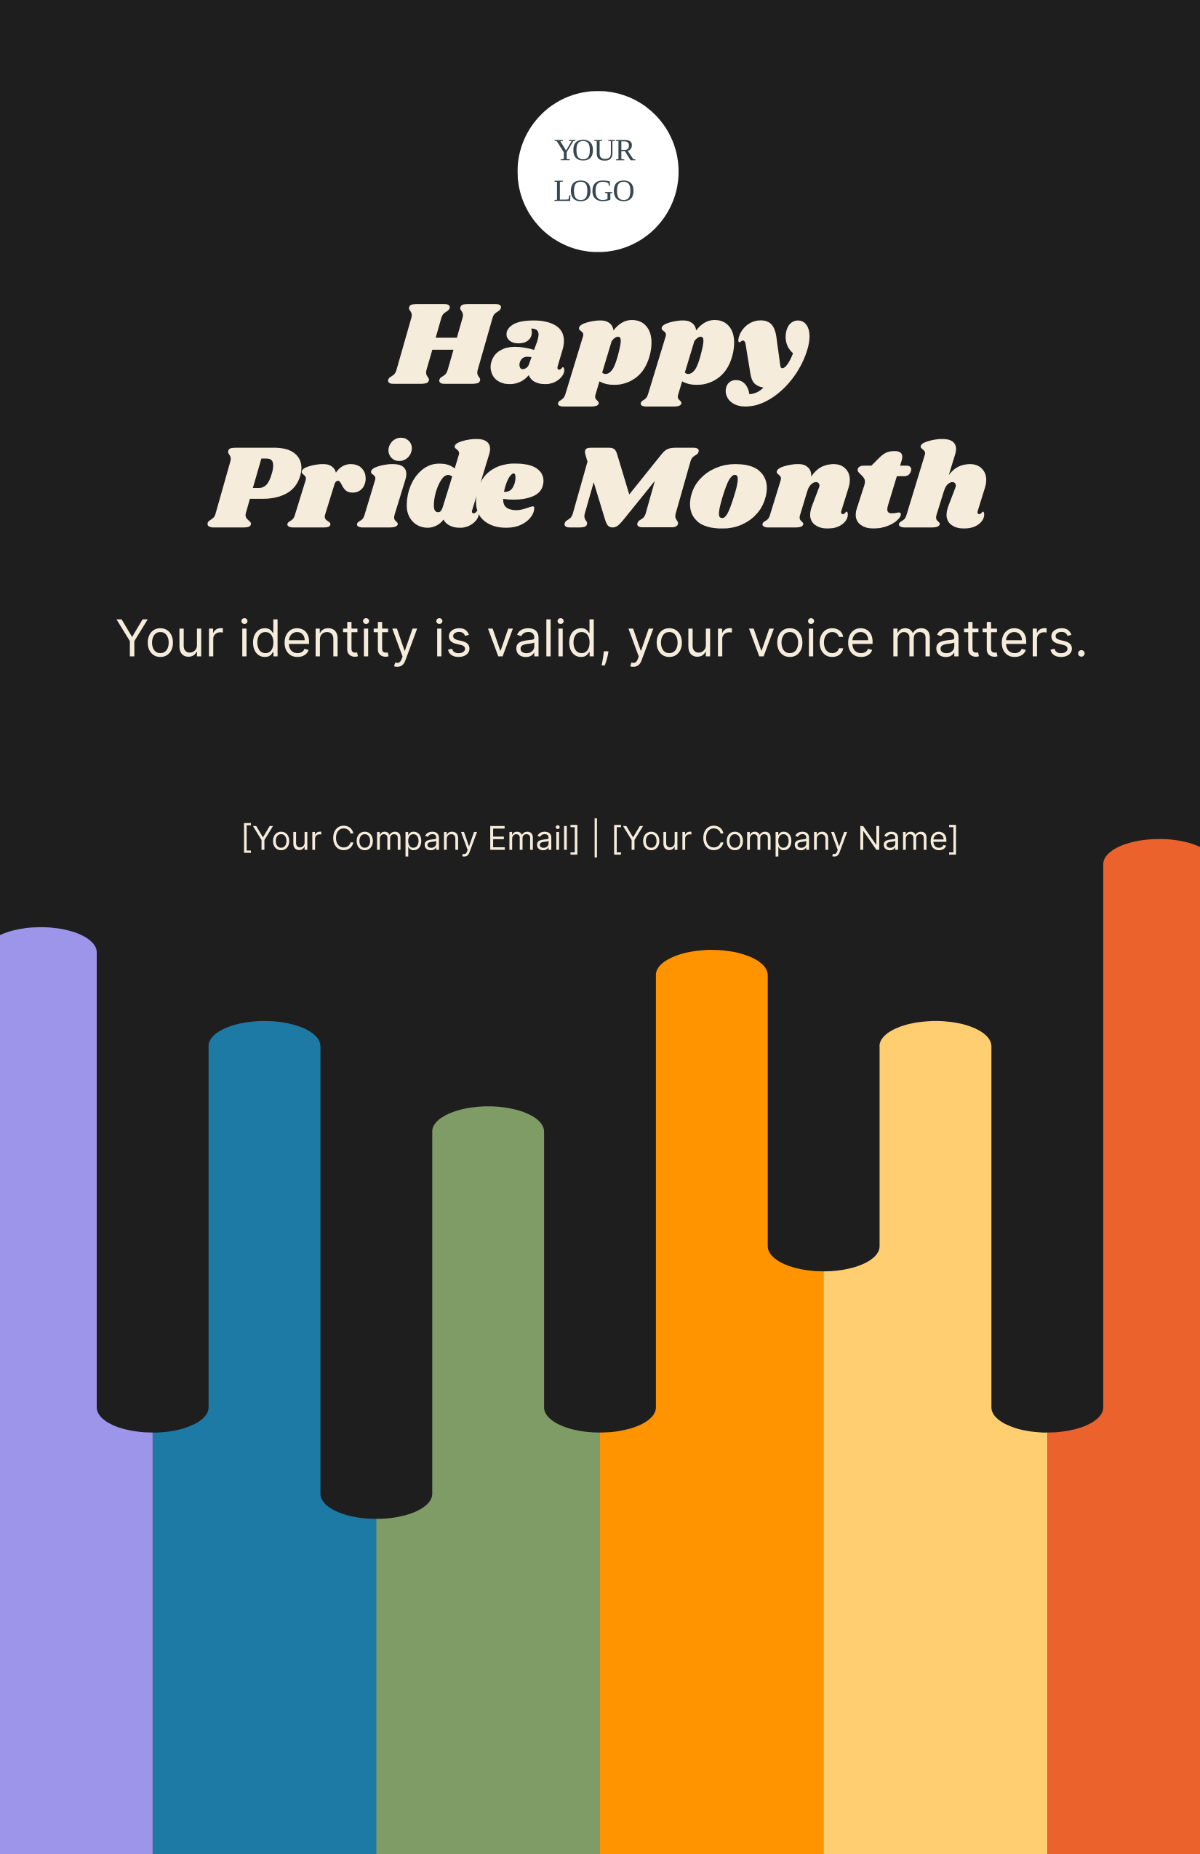 Happy Pride Month Poster